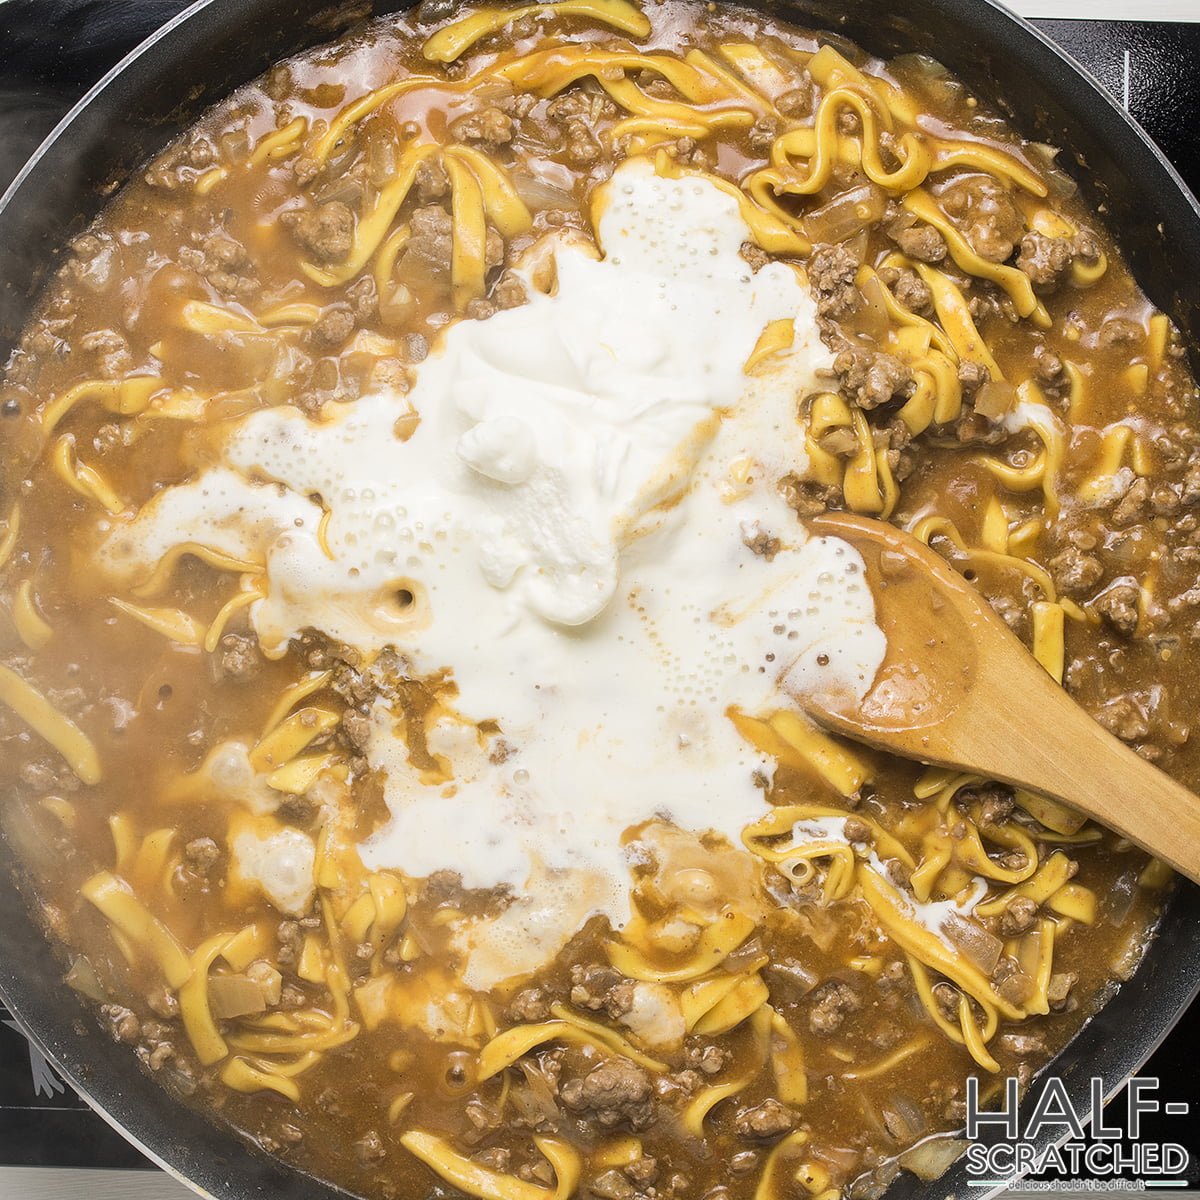 Adding the sour cream and heavy ncream to a beef Noodle skillet recipe